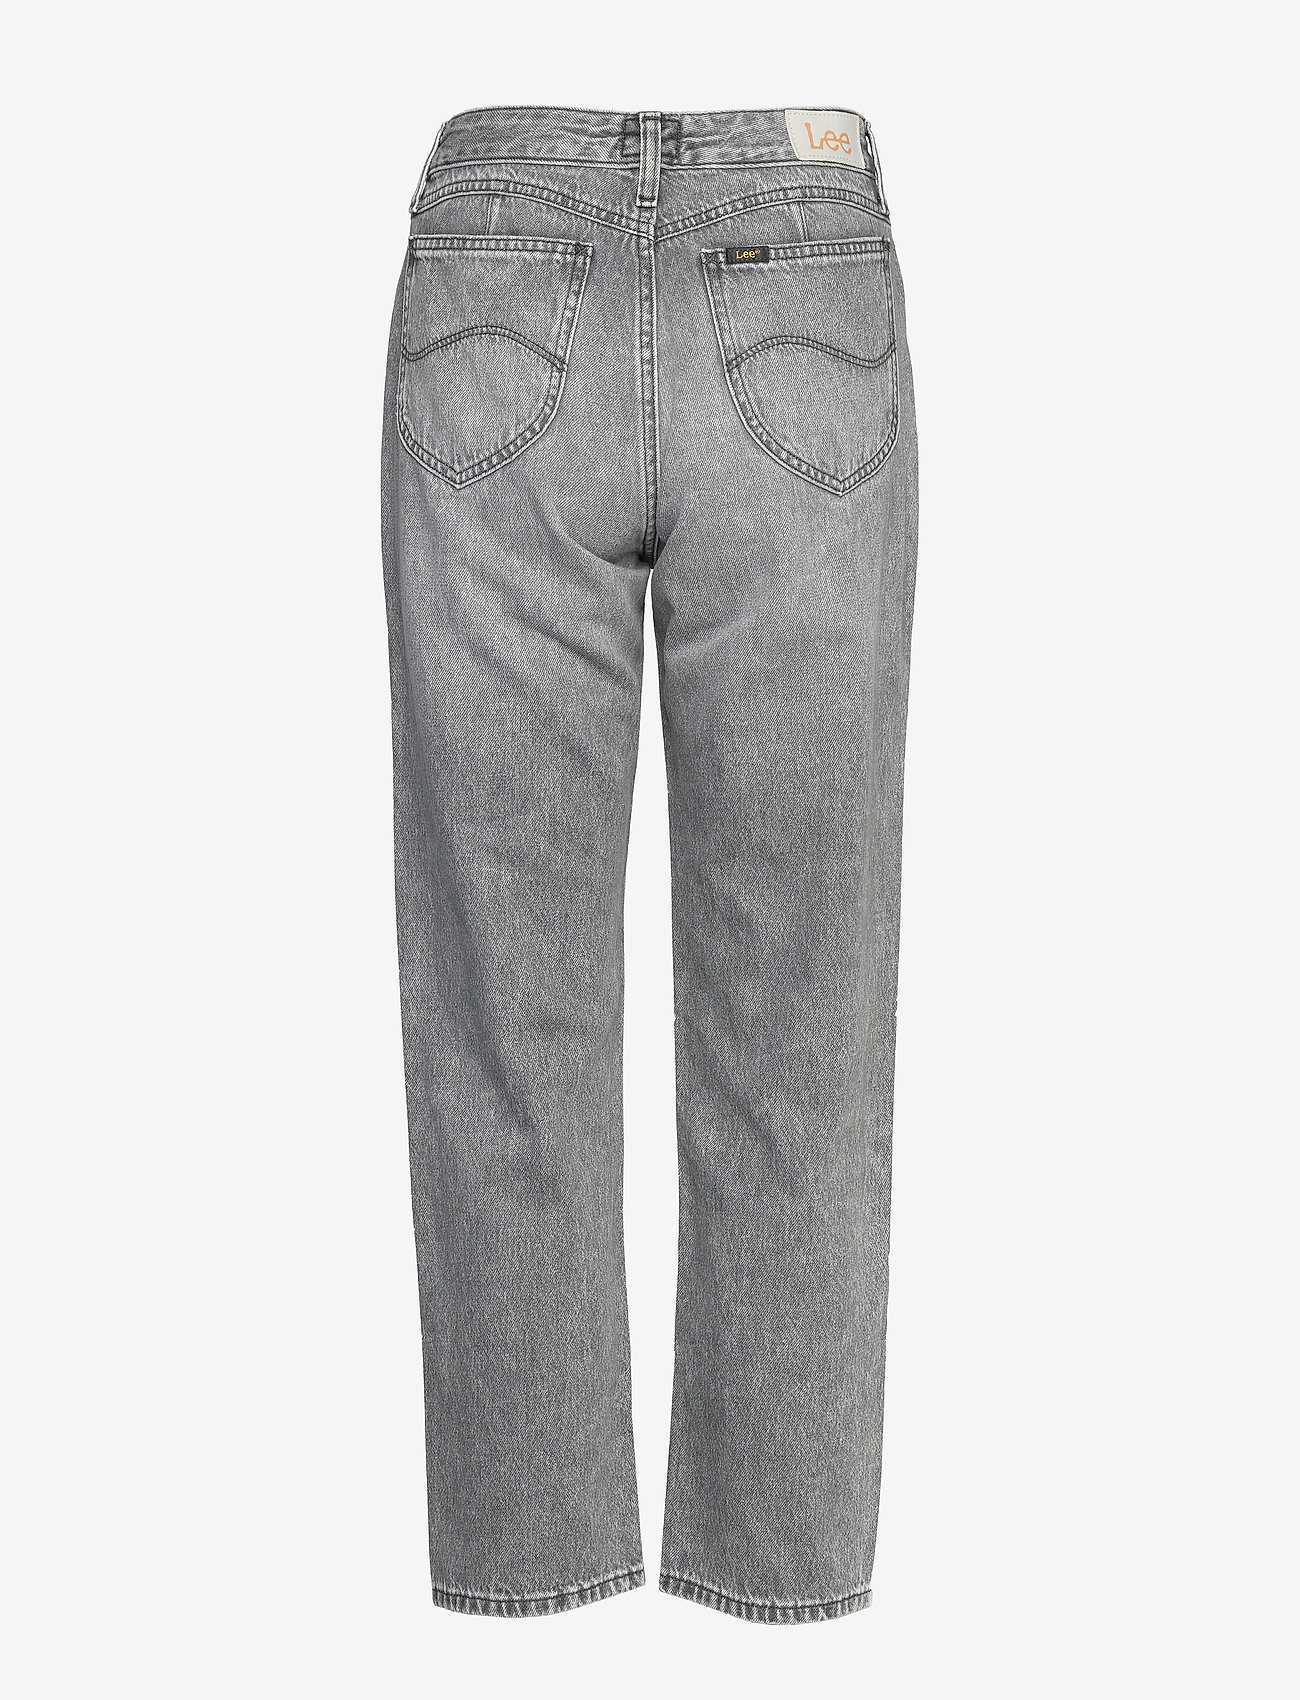 grey straight jeans